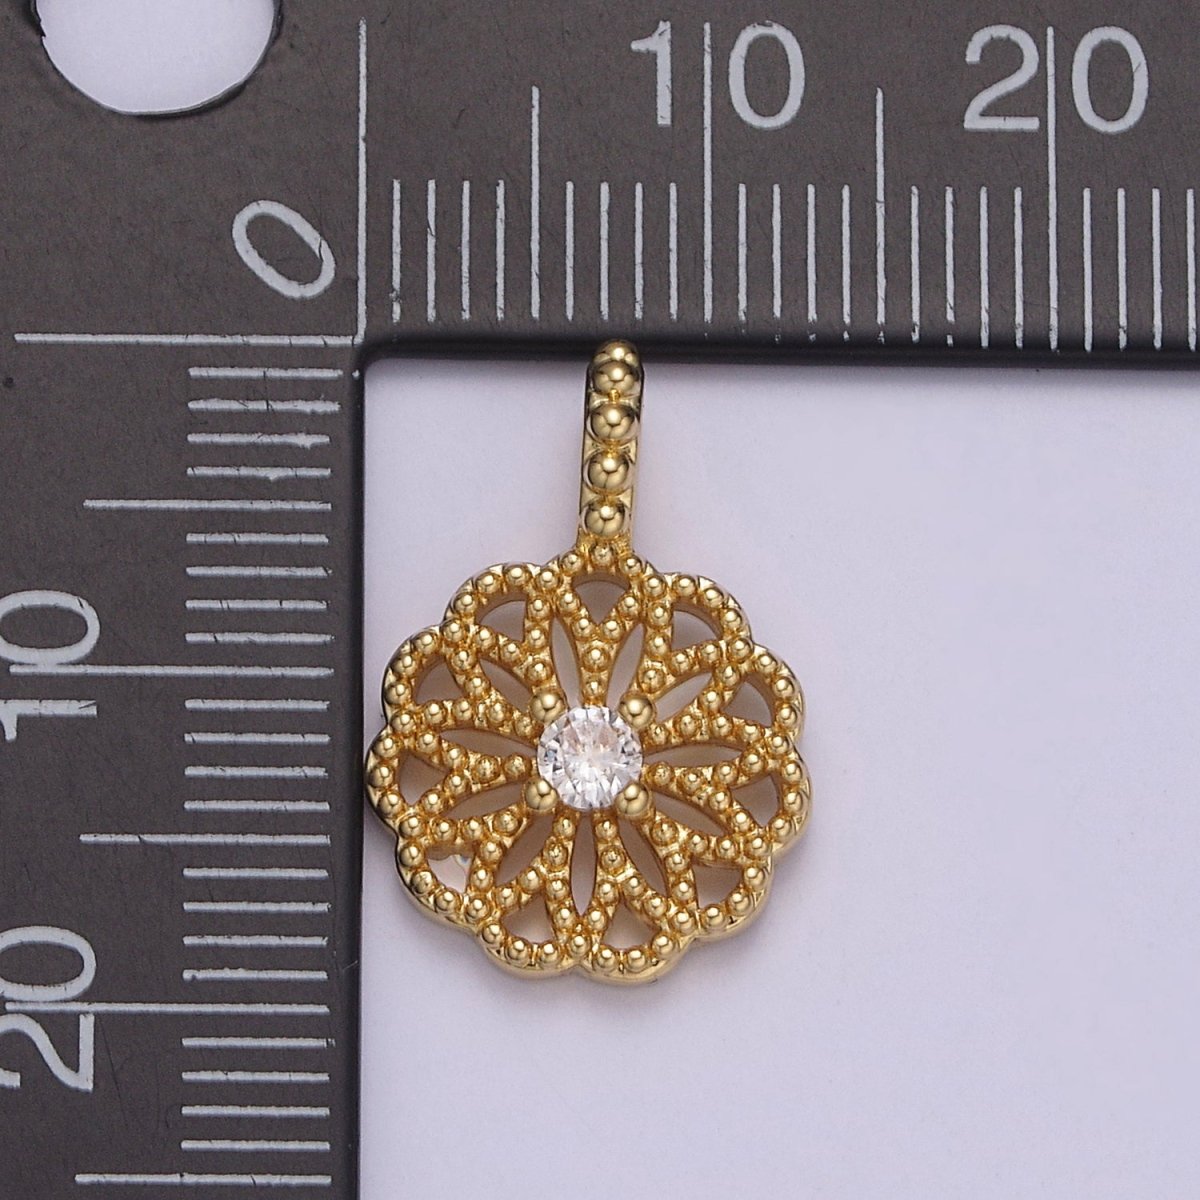 24K Gold Filled Floral Beaded Pendant with Clear CZ in the center for Minimalist Jewelry I-893 - DLUXCA